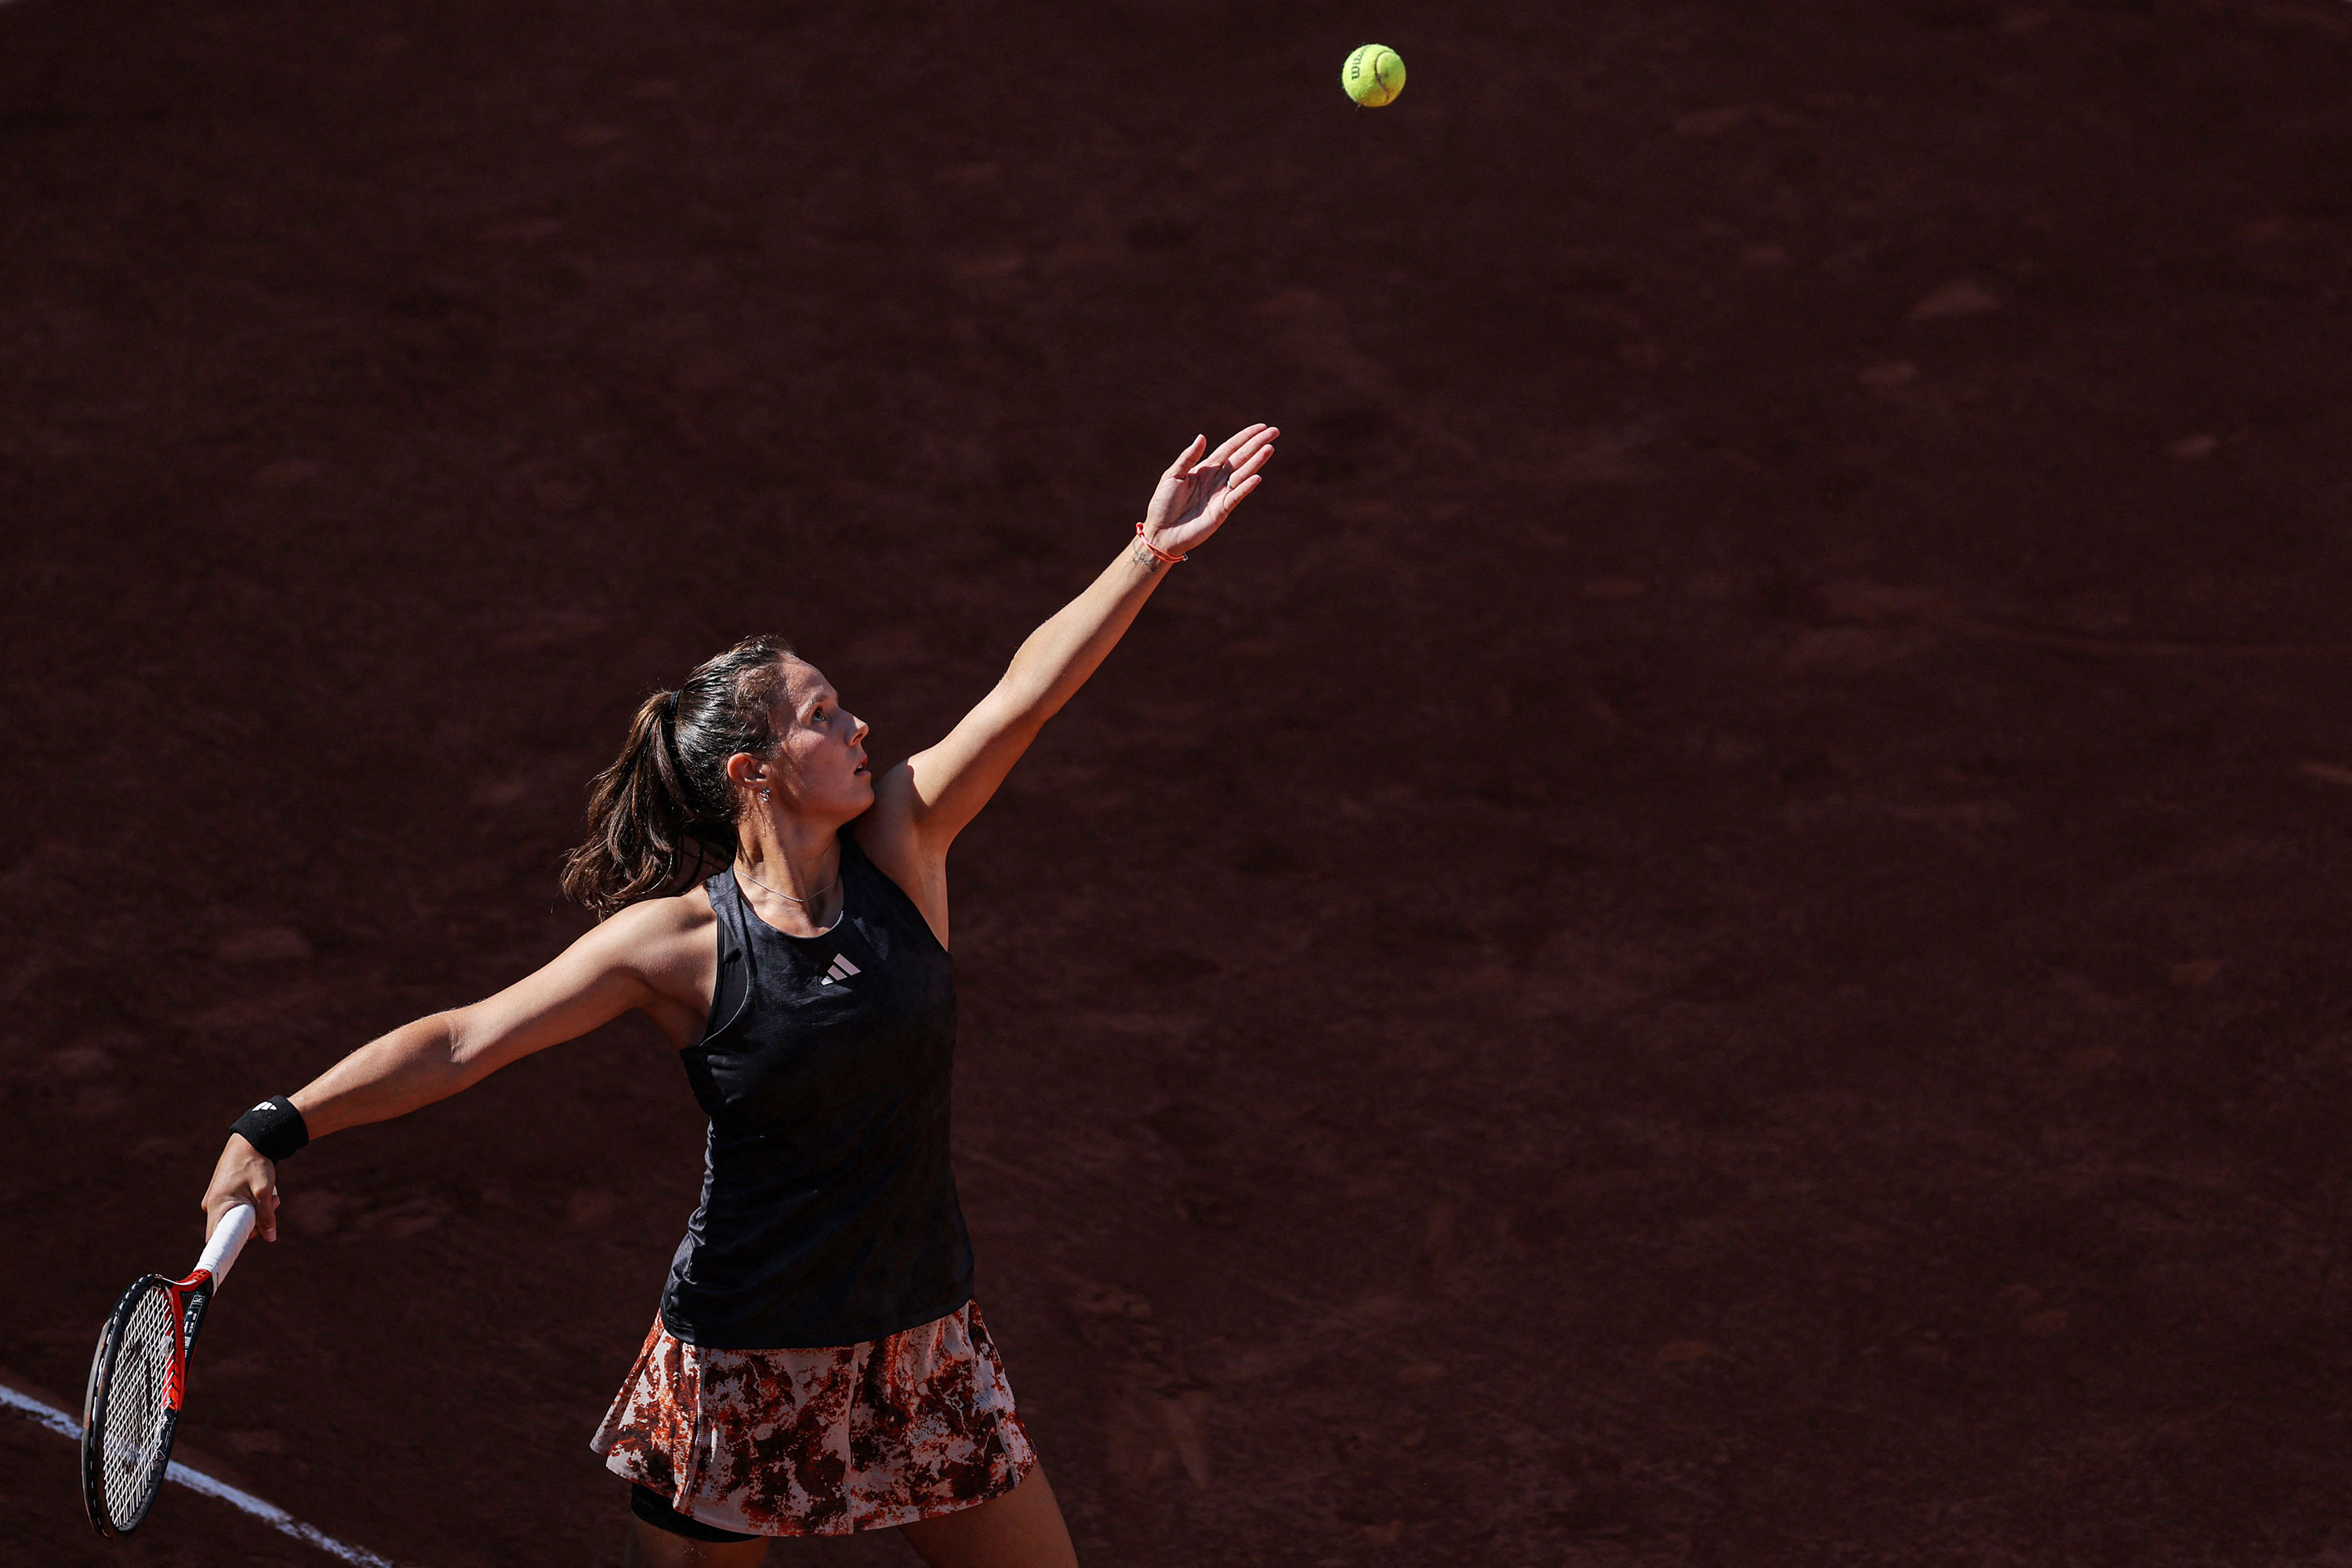 Russia's Daria Kasatkina serves to Elina Svitolina during their match in Paris on June 4. 